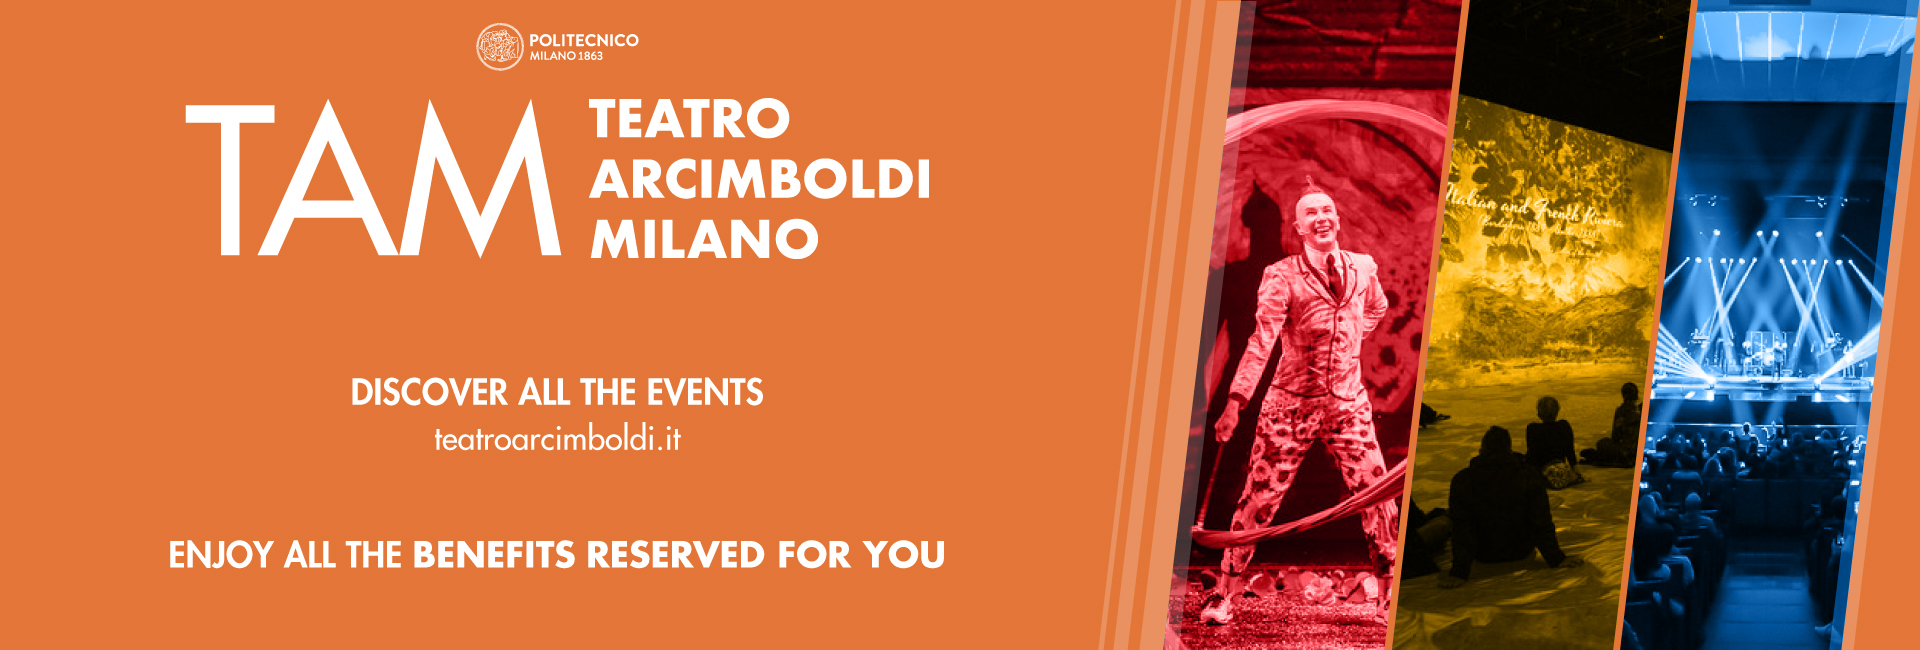 TEATRO ARCIMBOLDI MILANO: enjoy all the benefits reserved for you